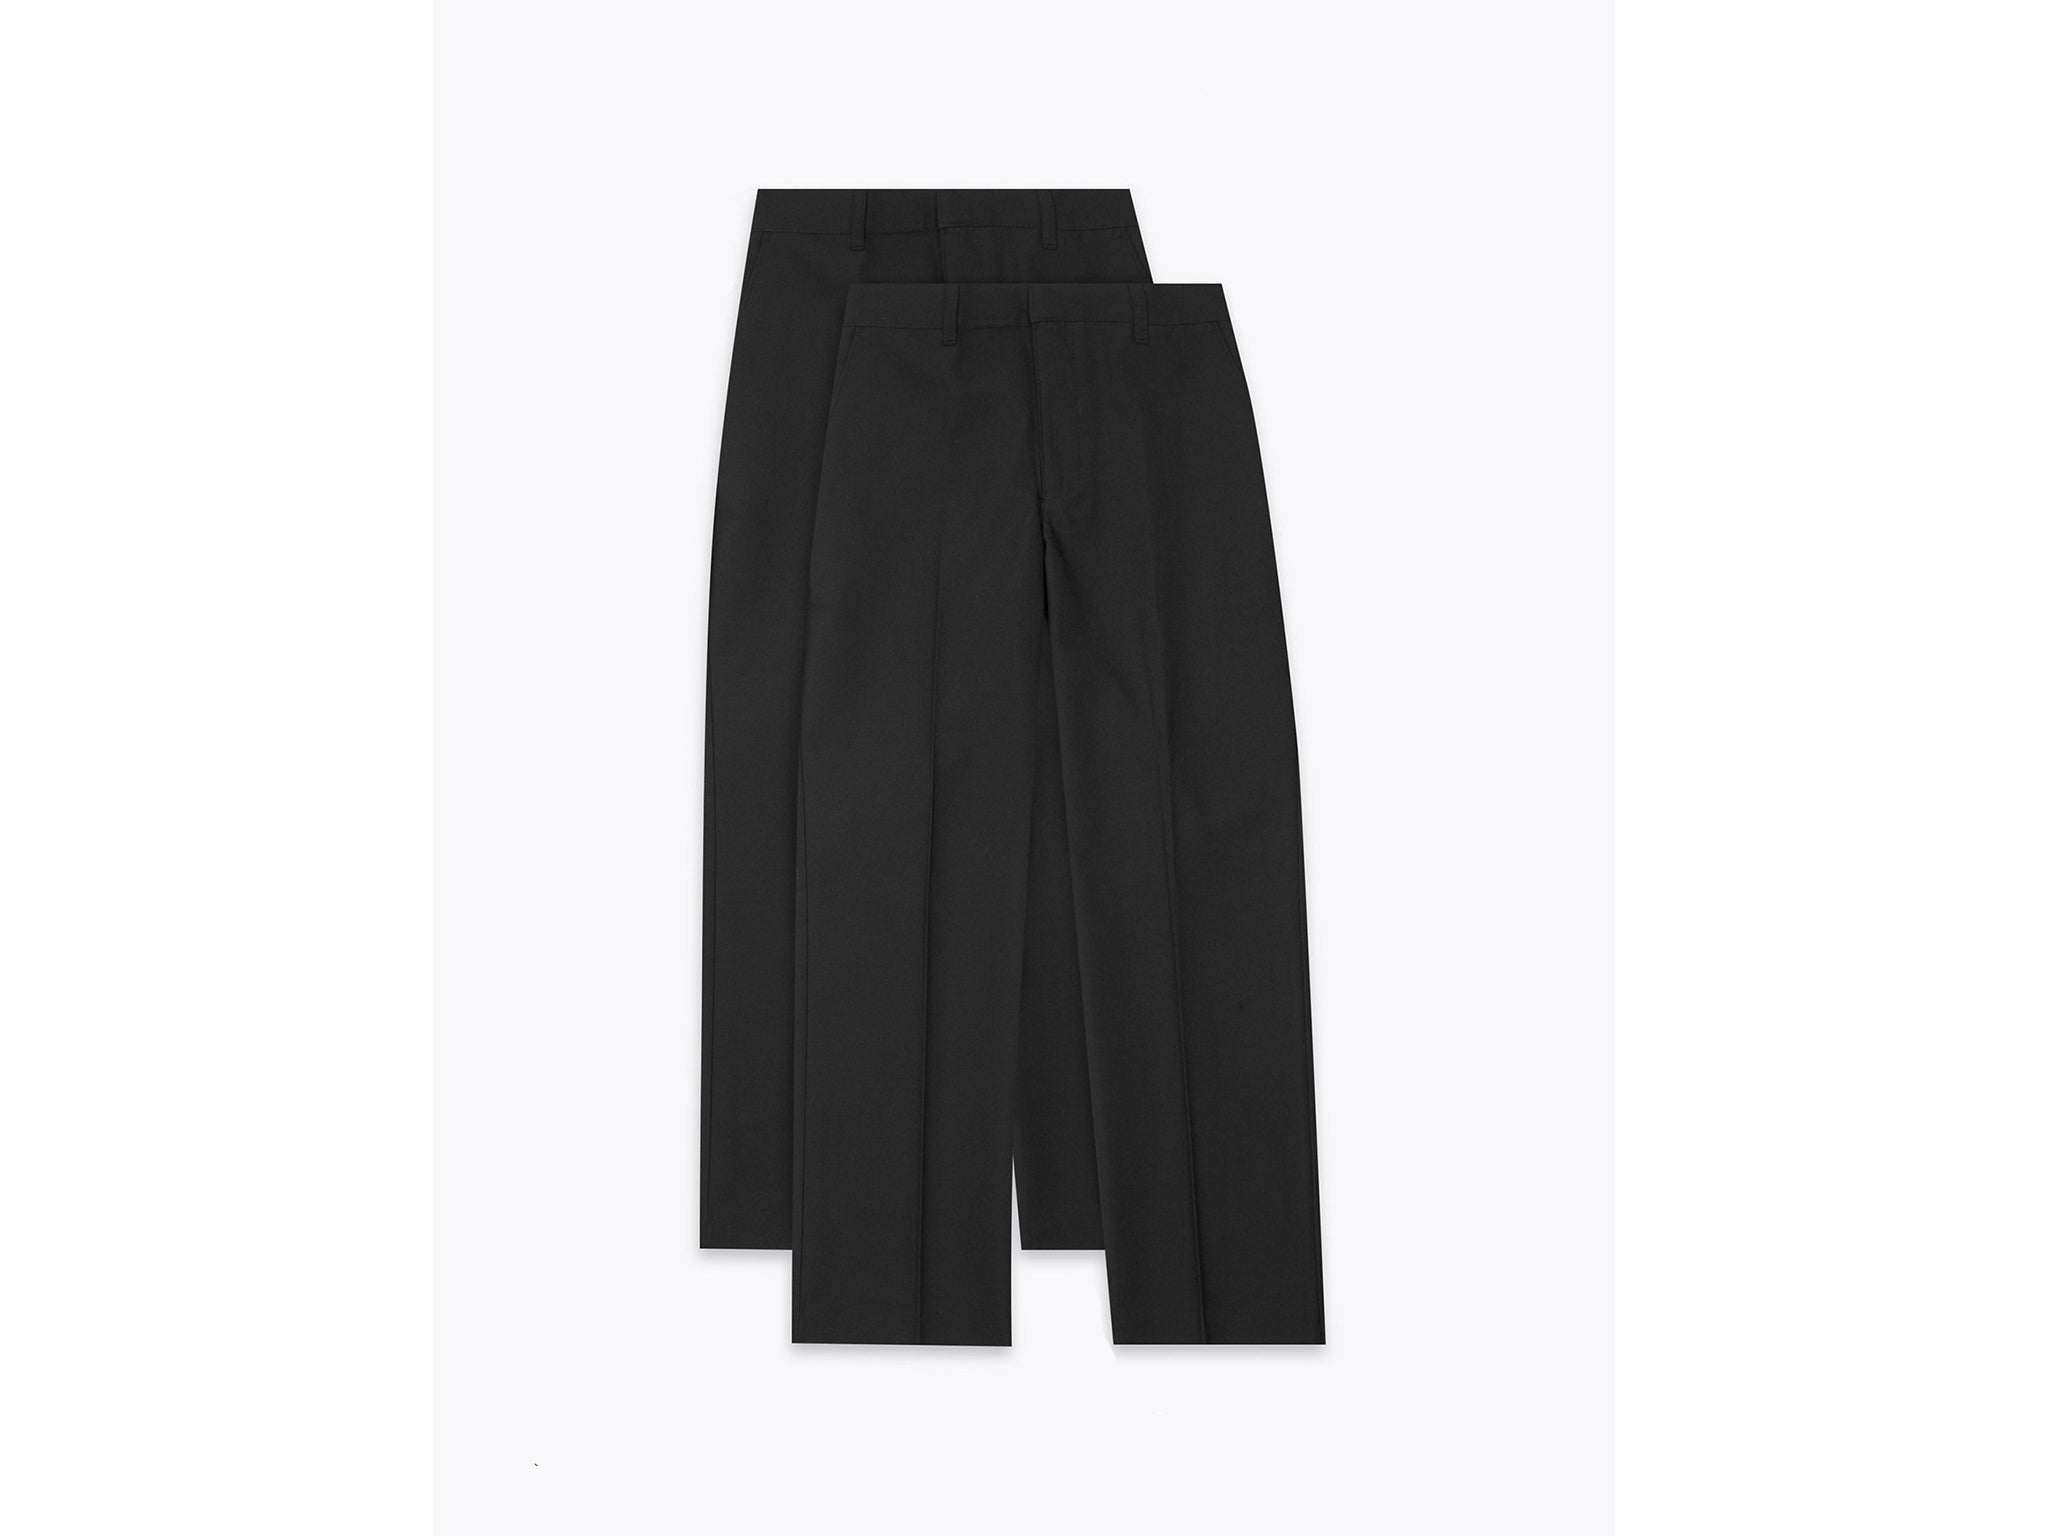 These stainproof trousers are ideal for messy school kids (M&amp;S)